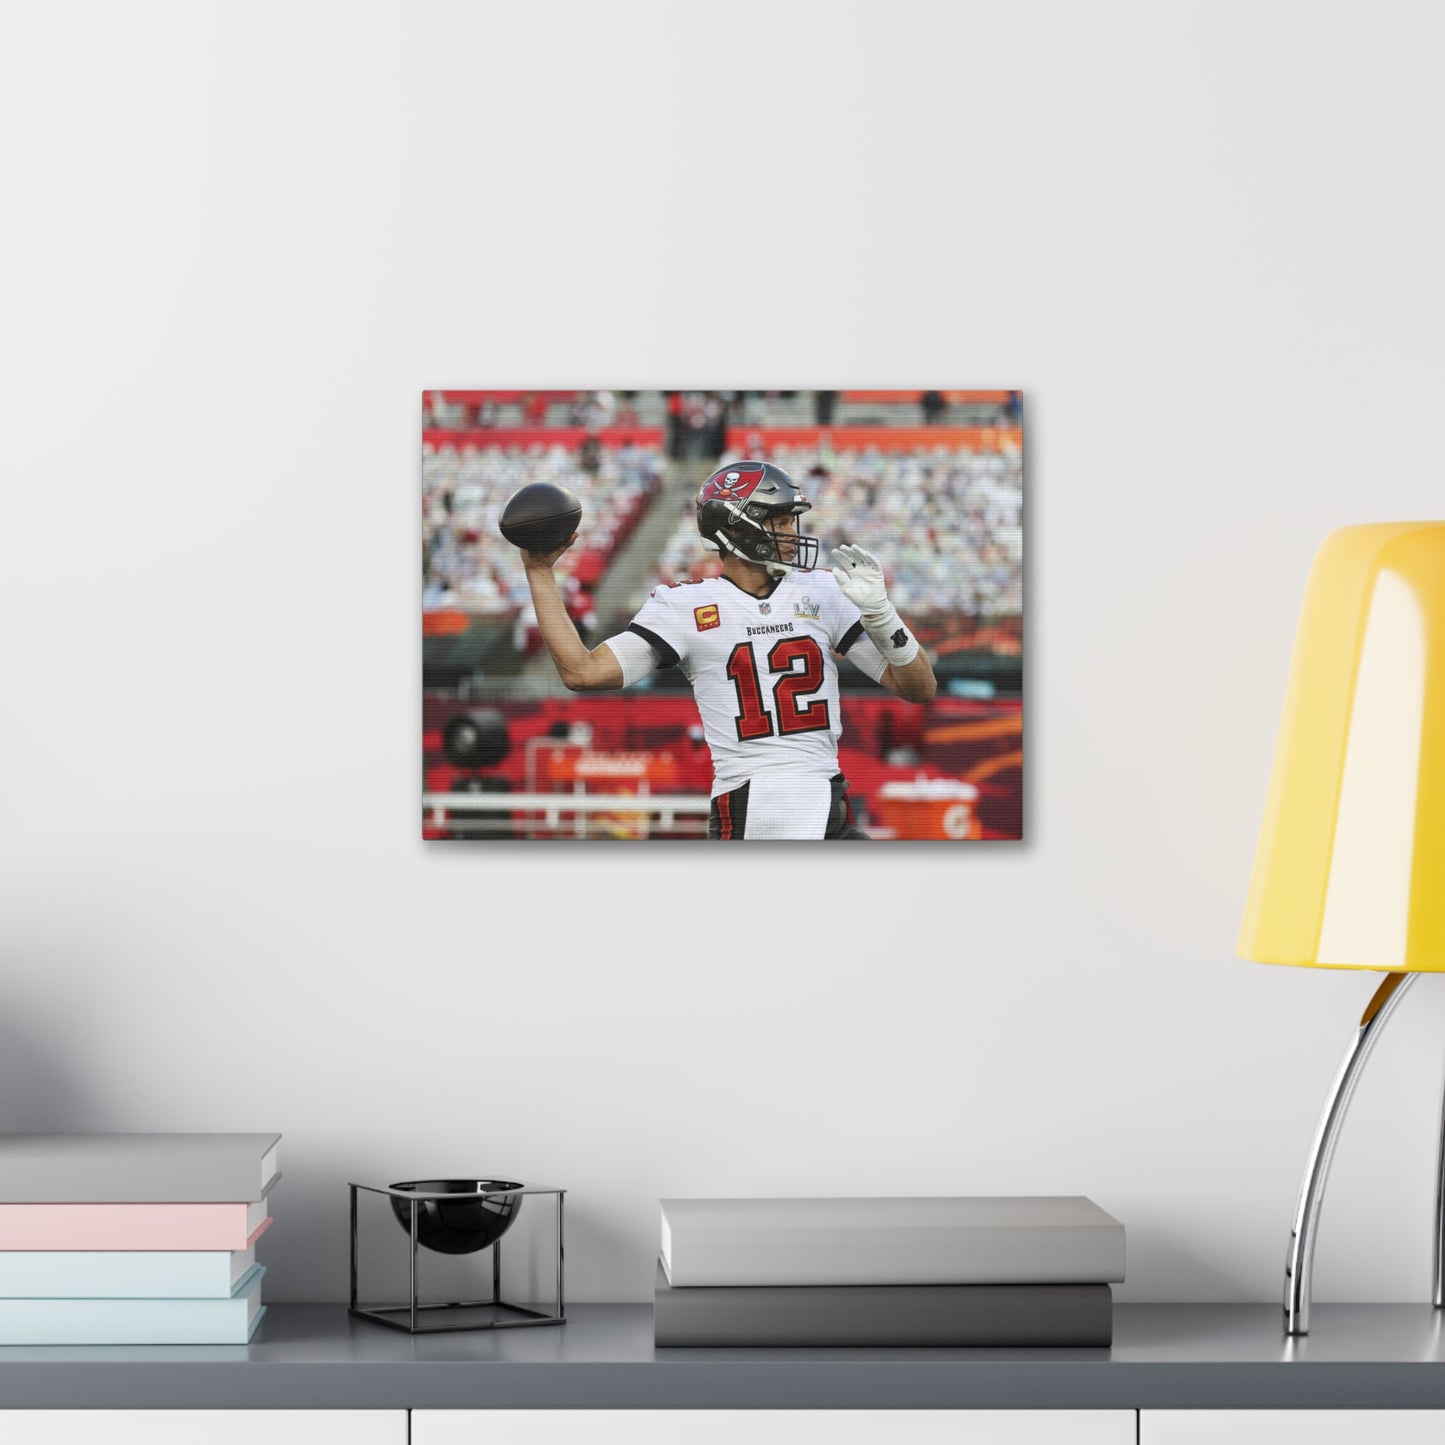 Tom Brady Throwing A Football With The Tampa Bay Buccaneers 12 Jersey Canvas Wall Art